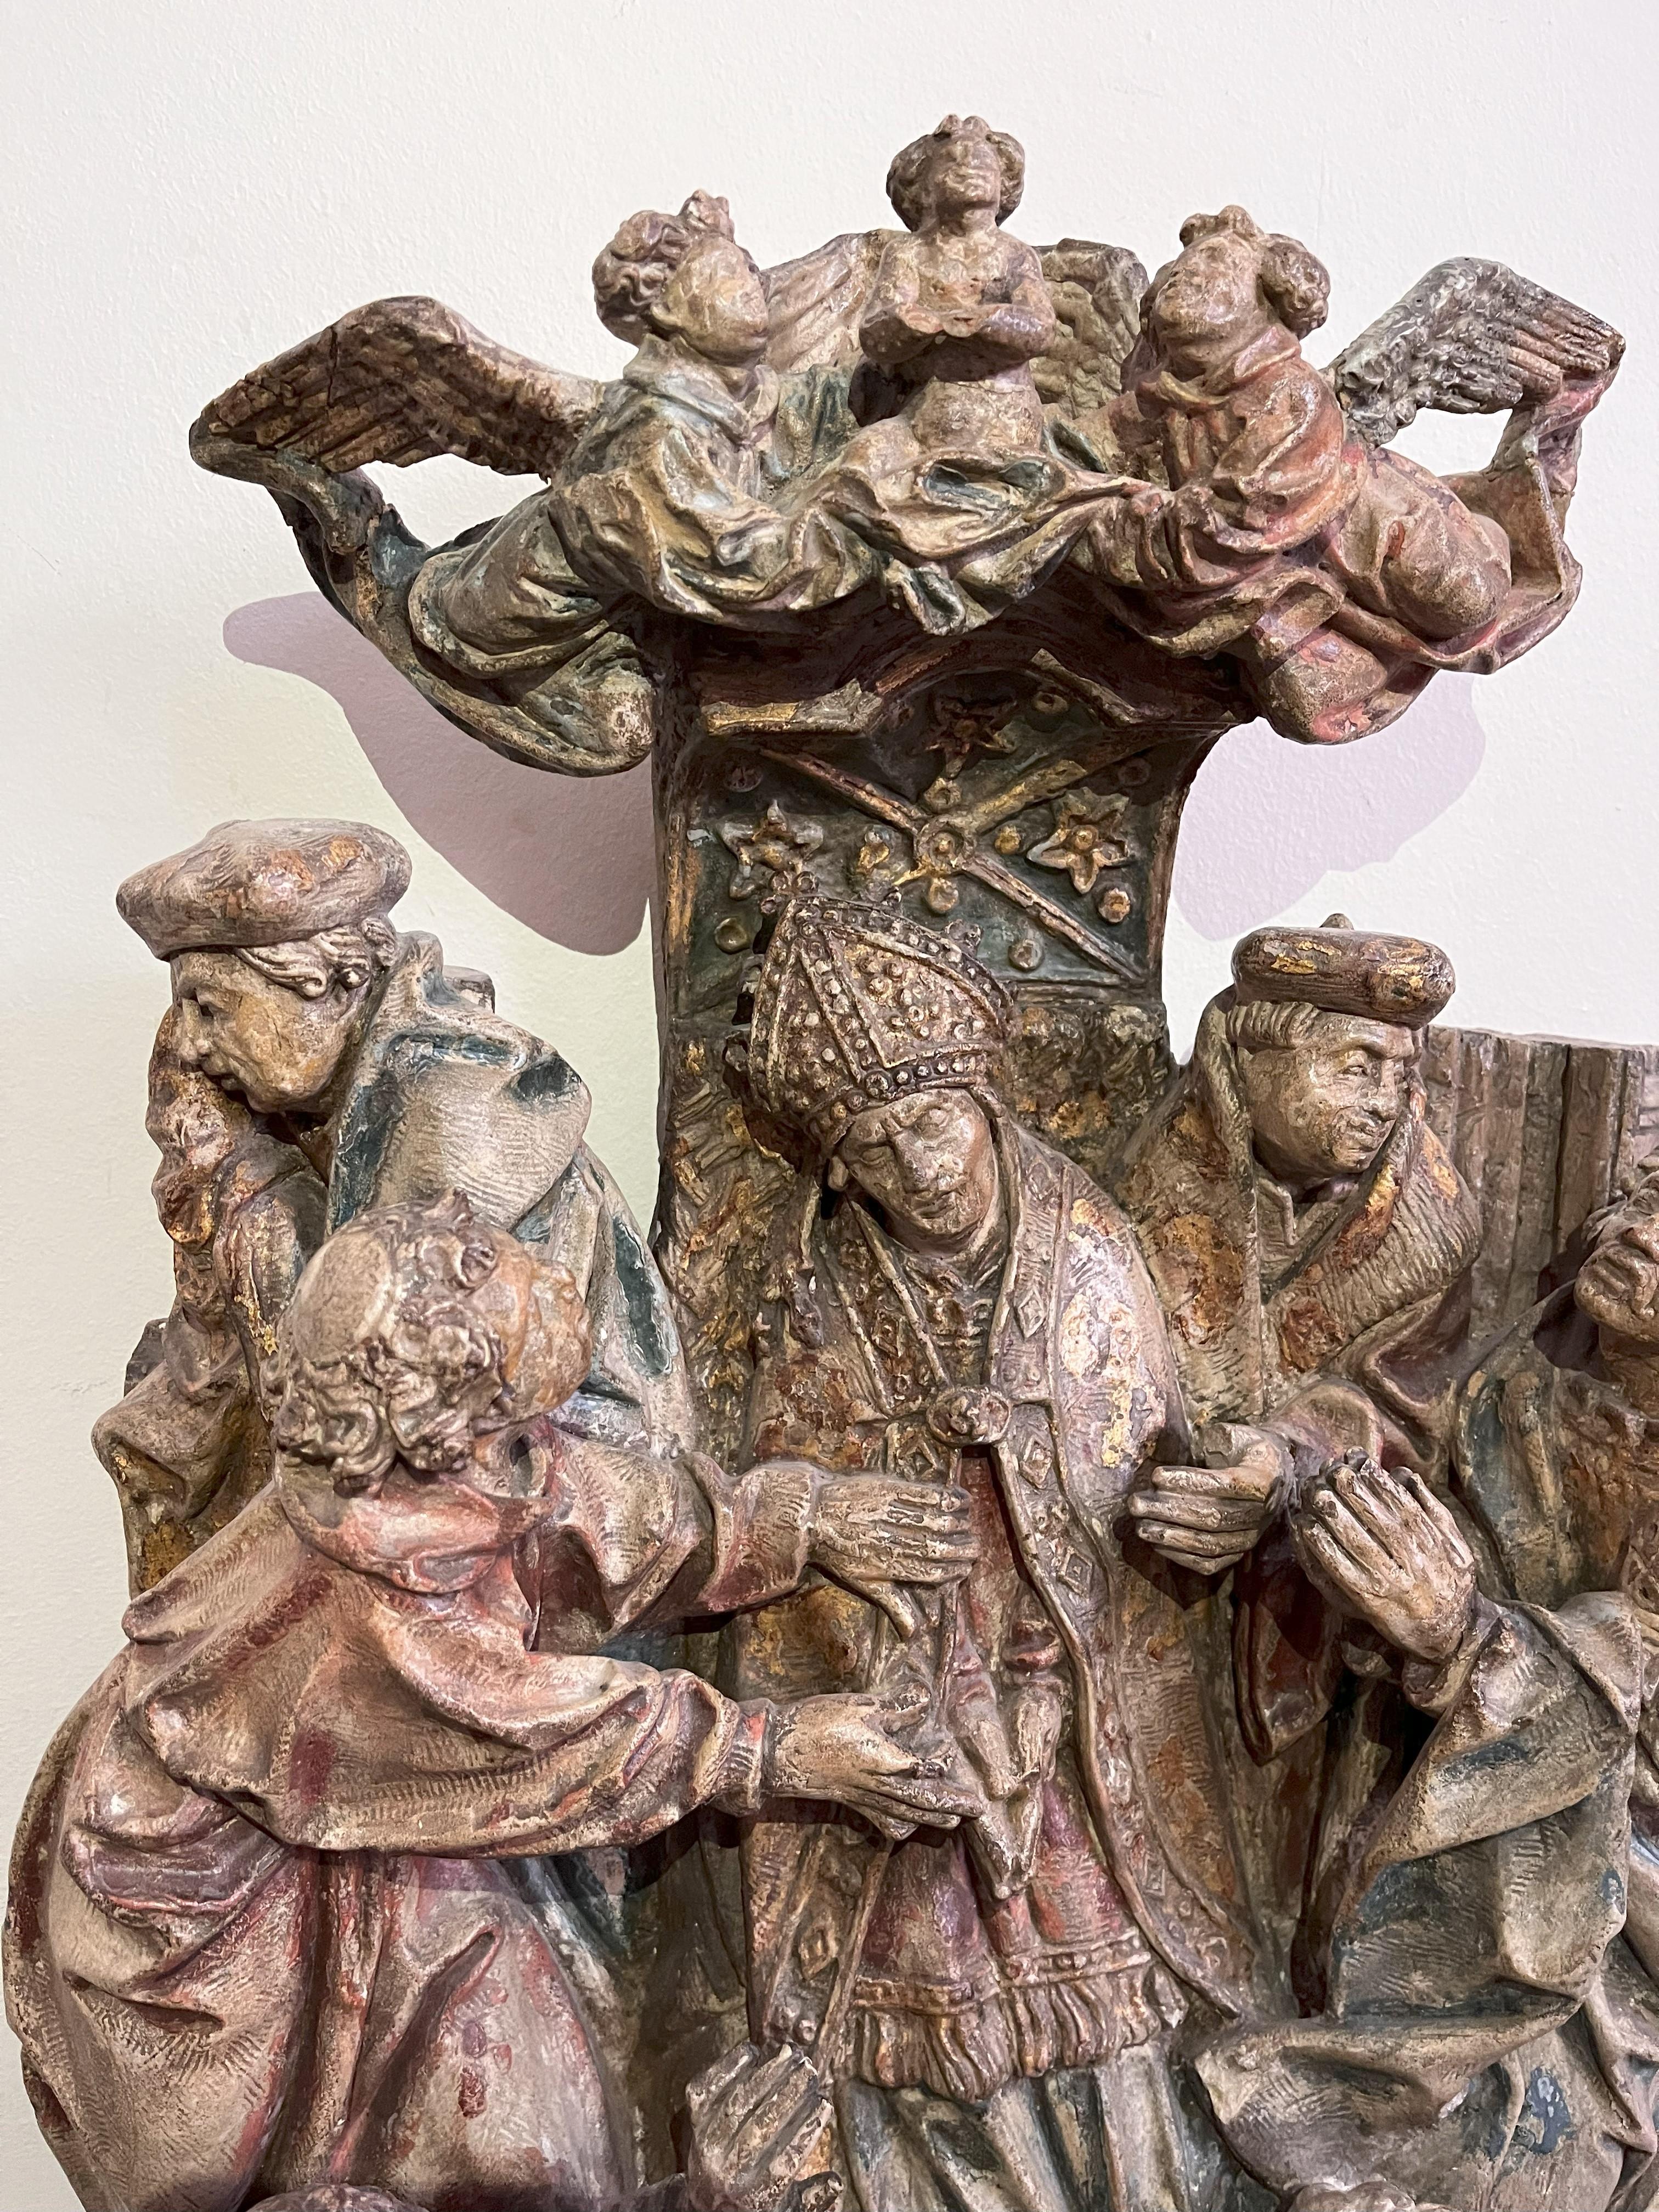 An Early 16th Century Stone Carving with polychrome : 'The Death of a Prelate'. The enthroned figure of a Bishop surrounded by attendants and surmounted by celestial angels.  